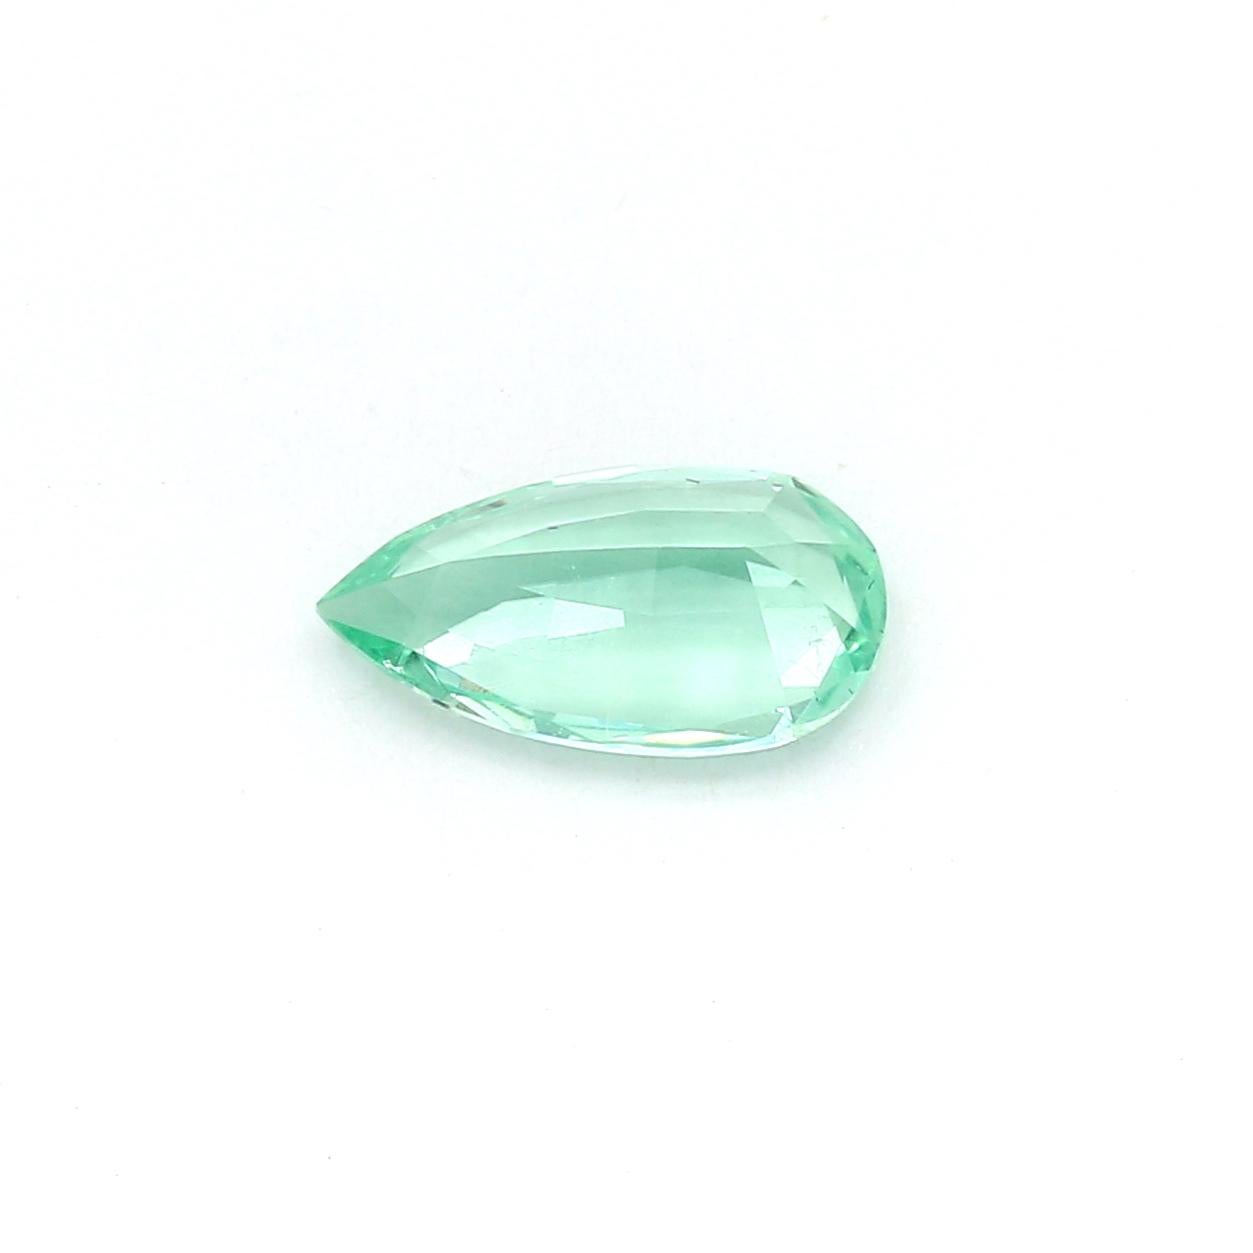 A pear-shaped Emerald, weighing 1 carat, with a beautiful neon green color.
Emeralds are one of the oldest and most popular gemstones. They have been prized for their beauty, color and brilliance throughout history. 
This precision cut pear-shaped